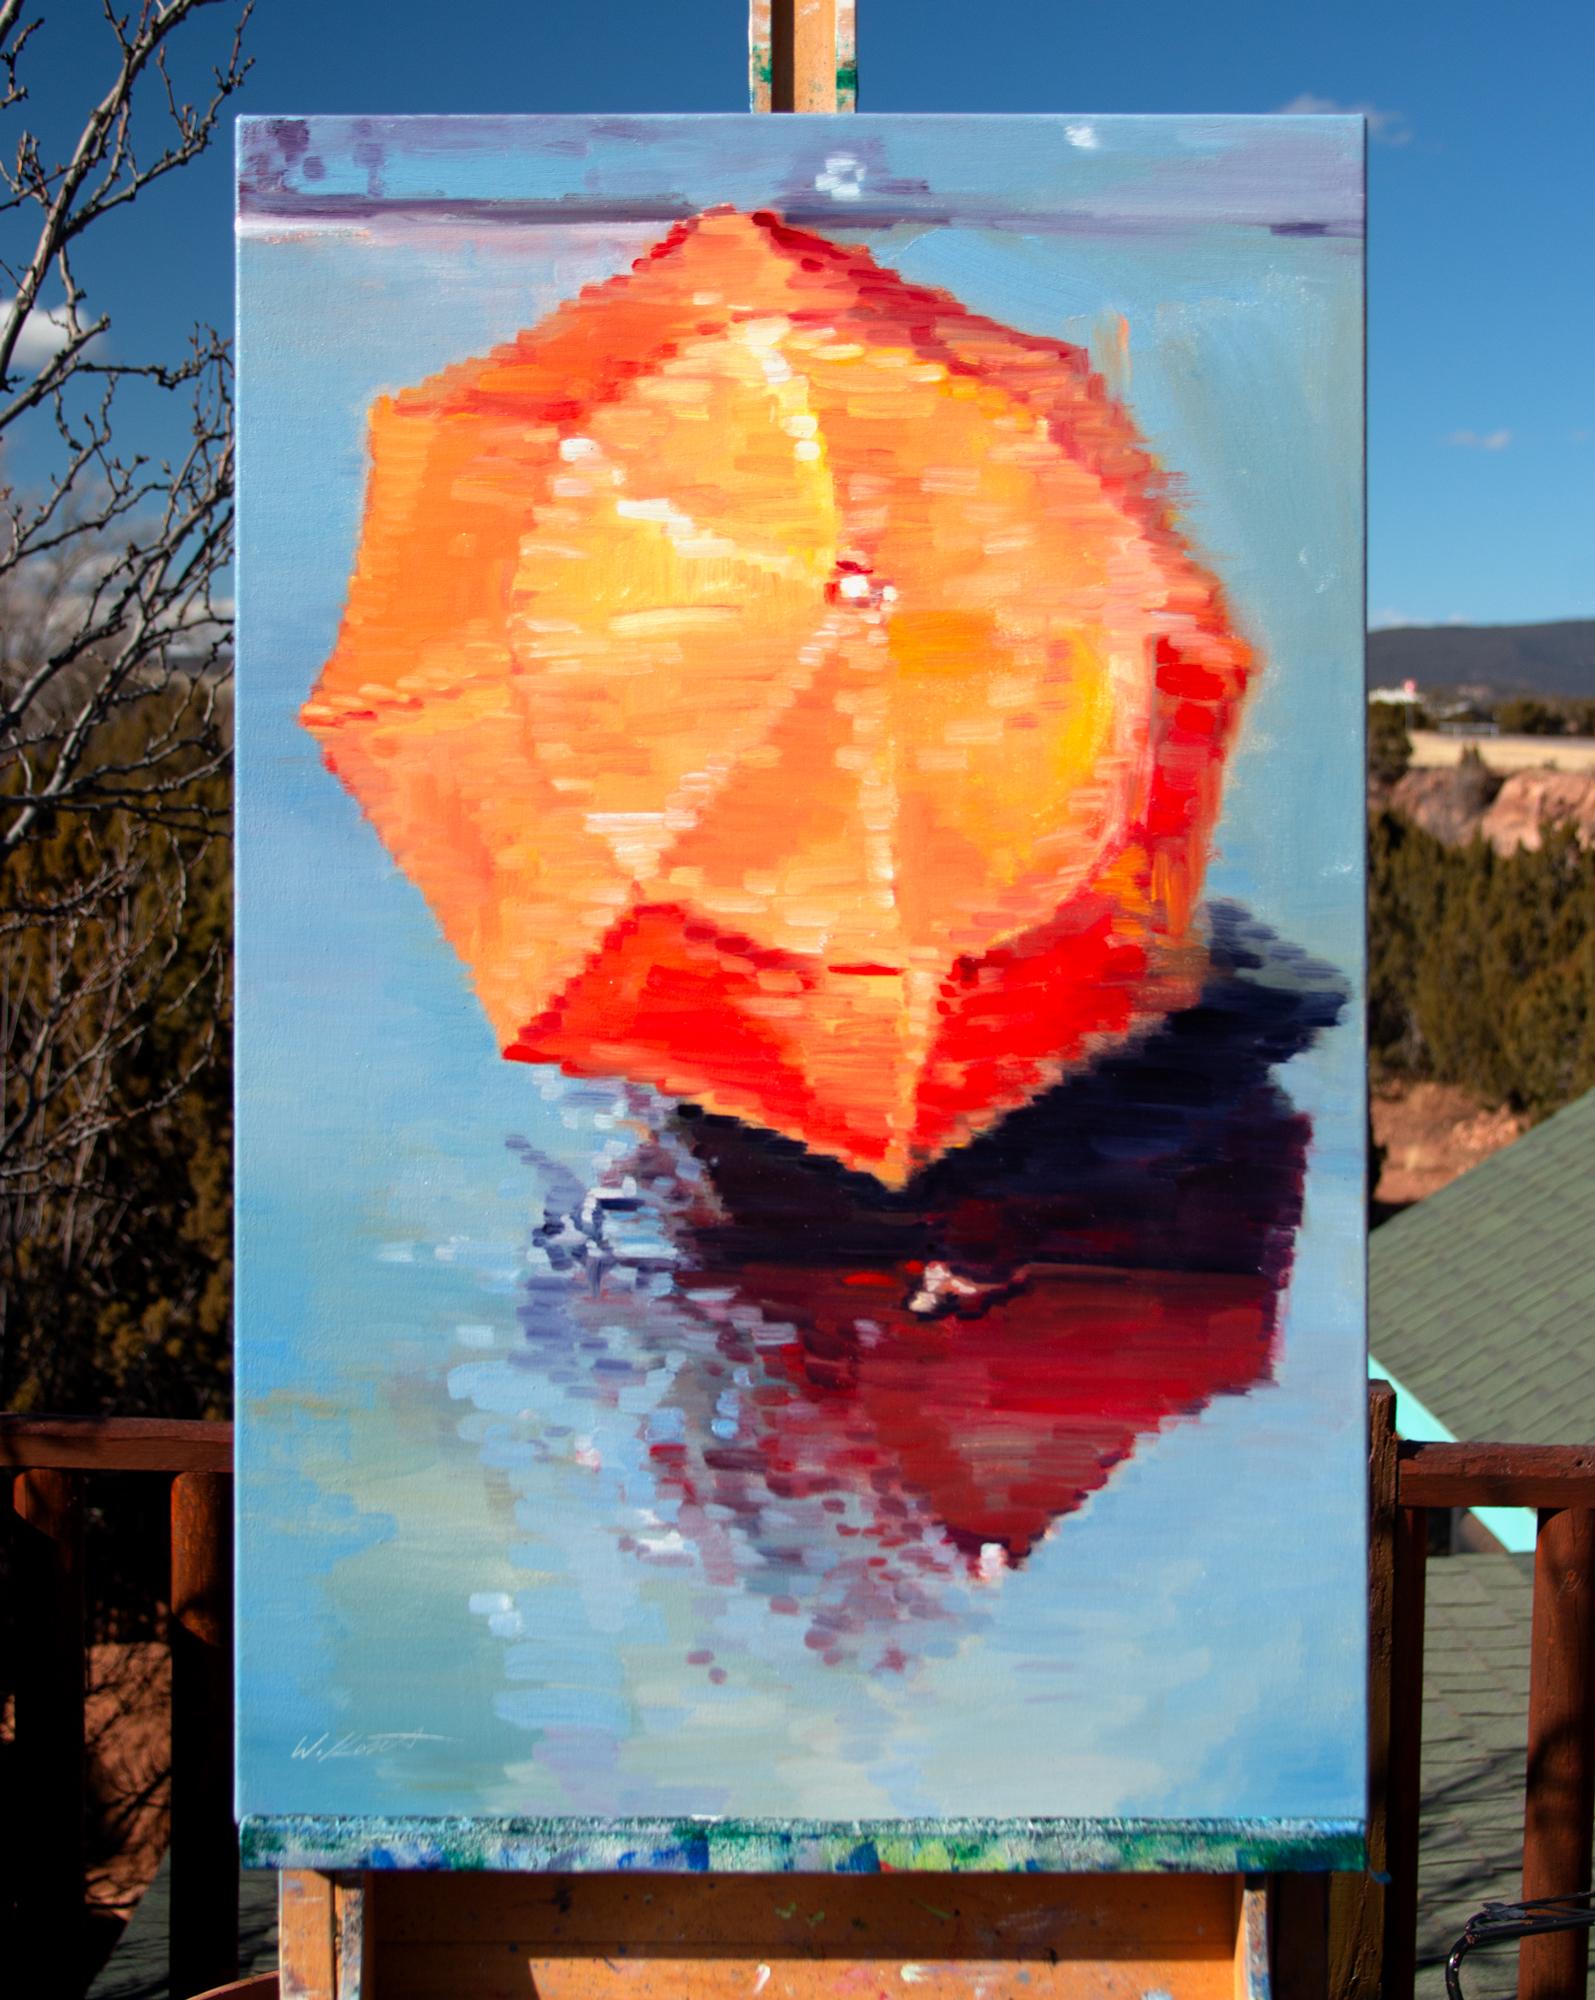 <p>Artist Comments<br>Artist Warren Keating exhibits a  motion-filled painting of an aerial view of an orange umbrella in the rain. He draws inspiration from witnessing the scene firsthand from his hotel balcony in Paris. Using his signature